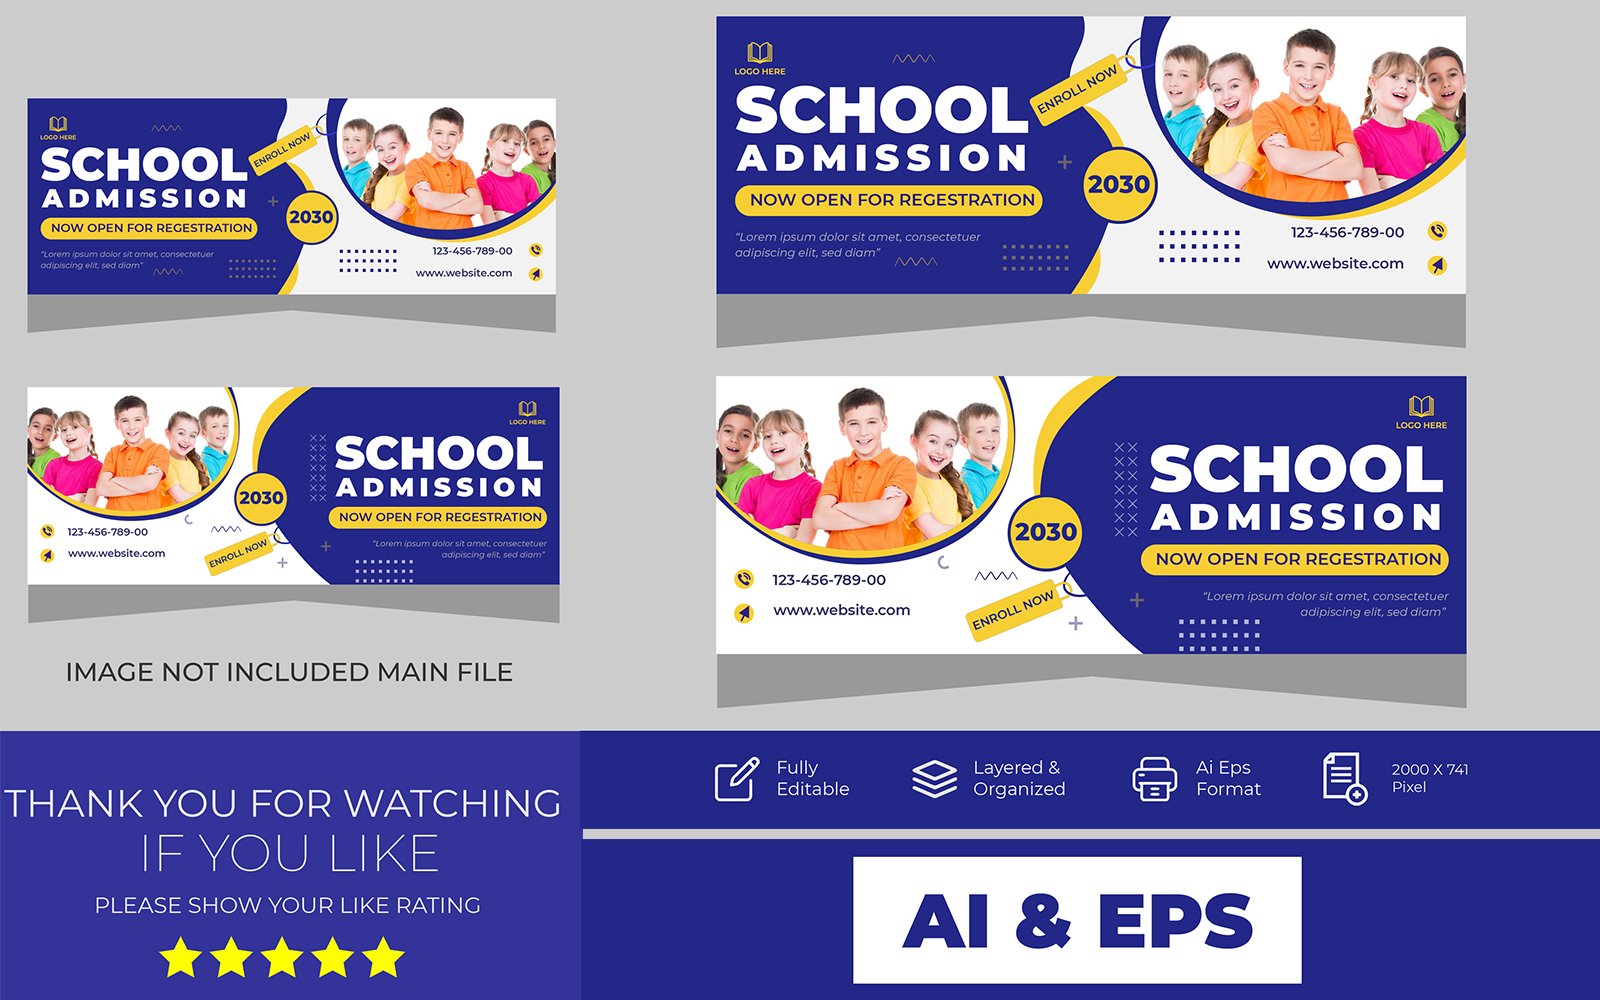 School Admission Facebook Cover And Social Media Ads templates - Blue, Yellow and White Design